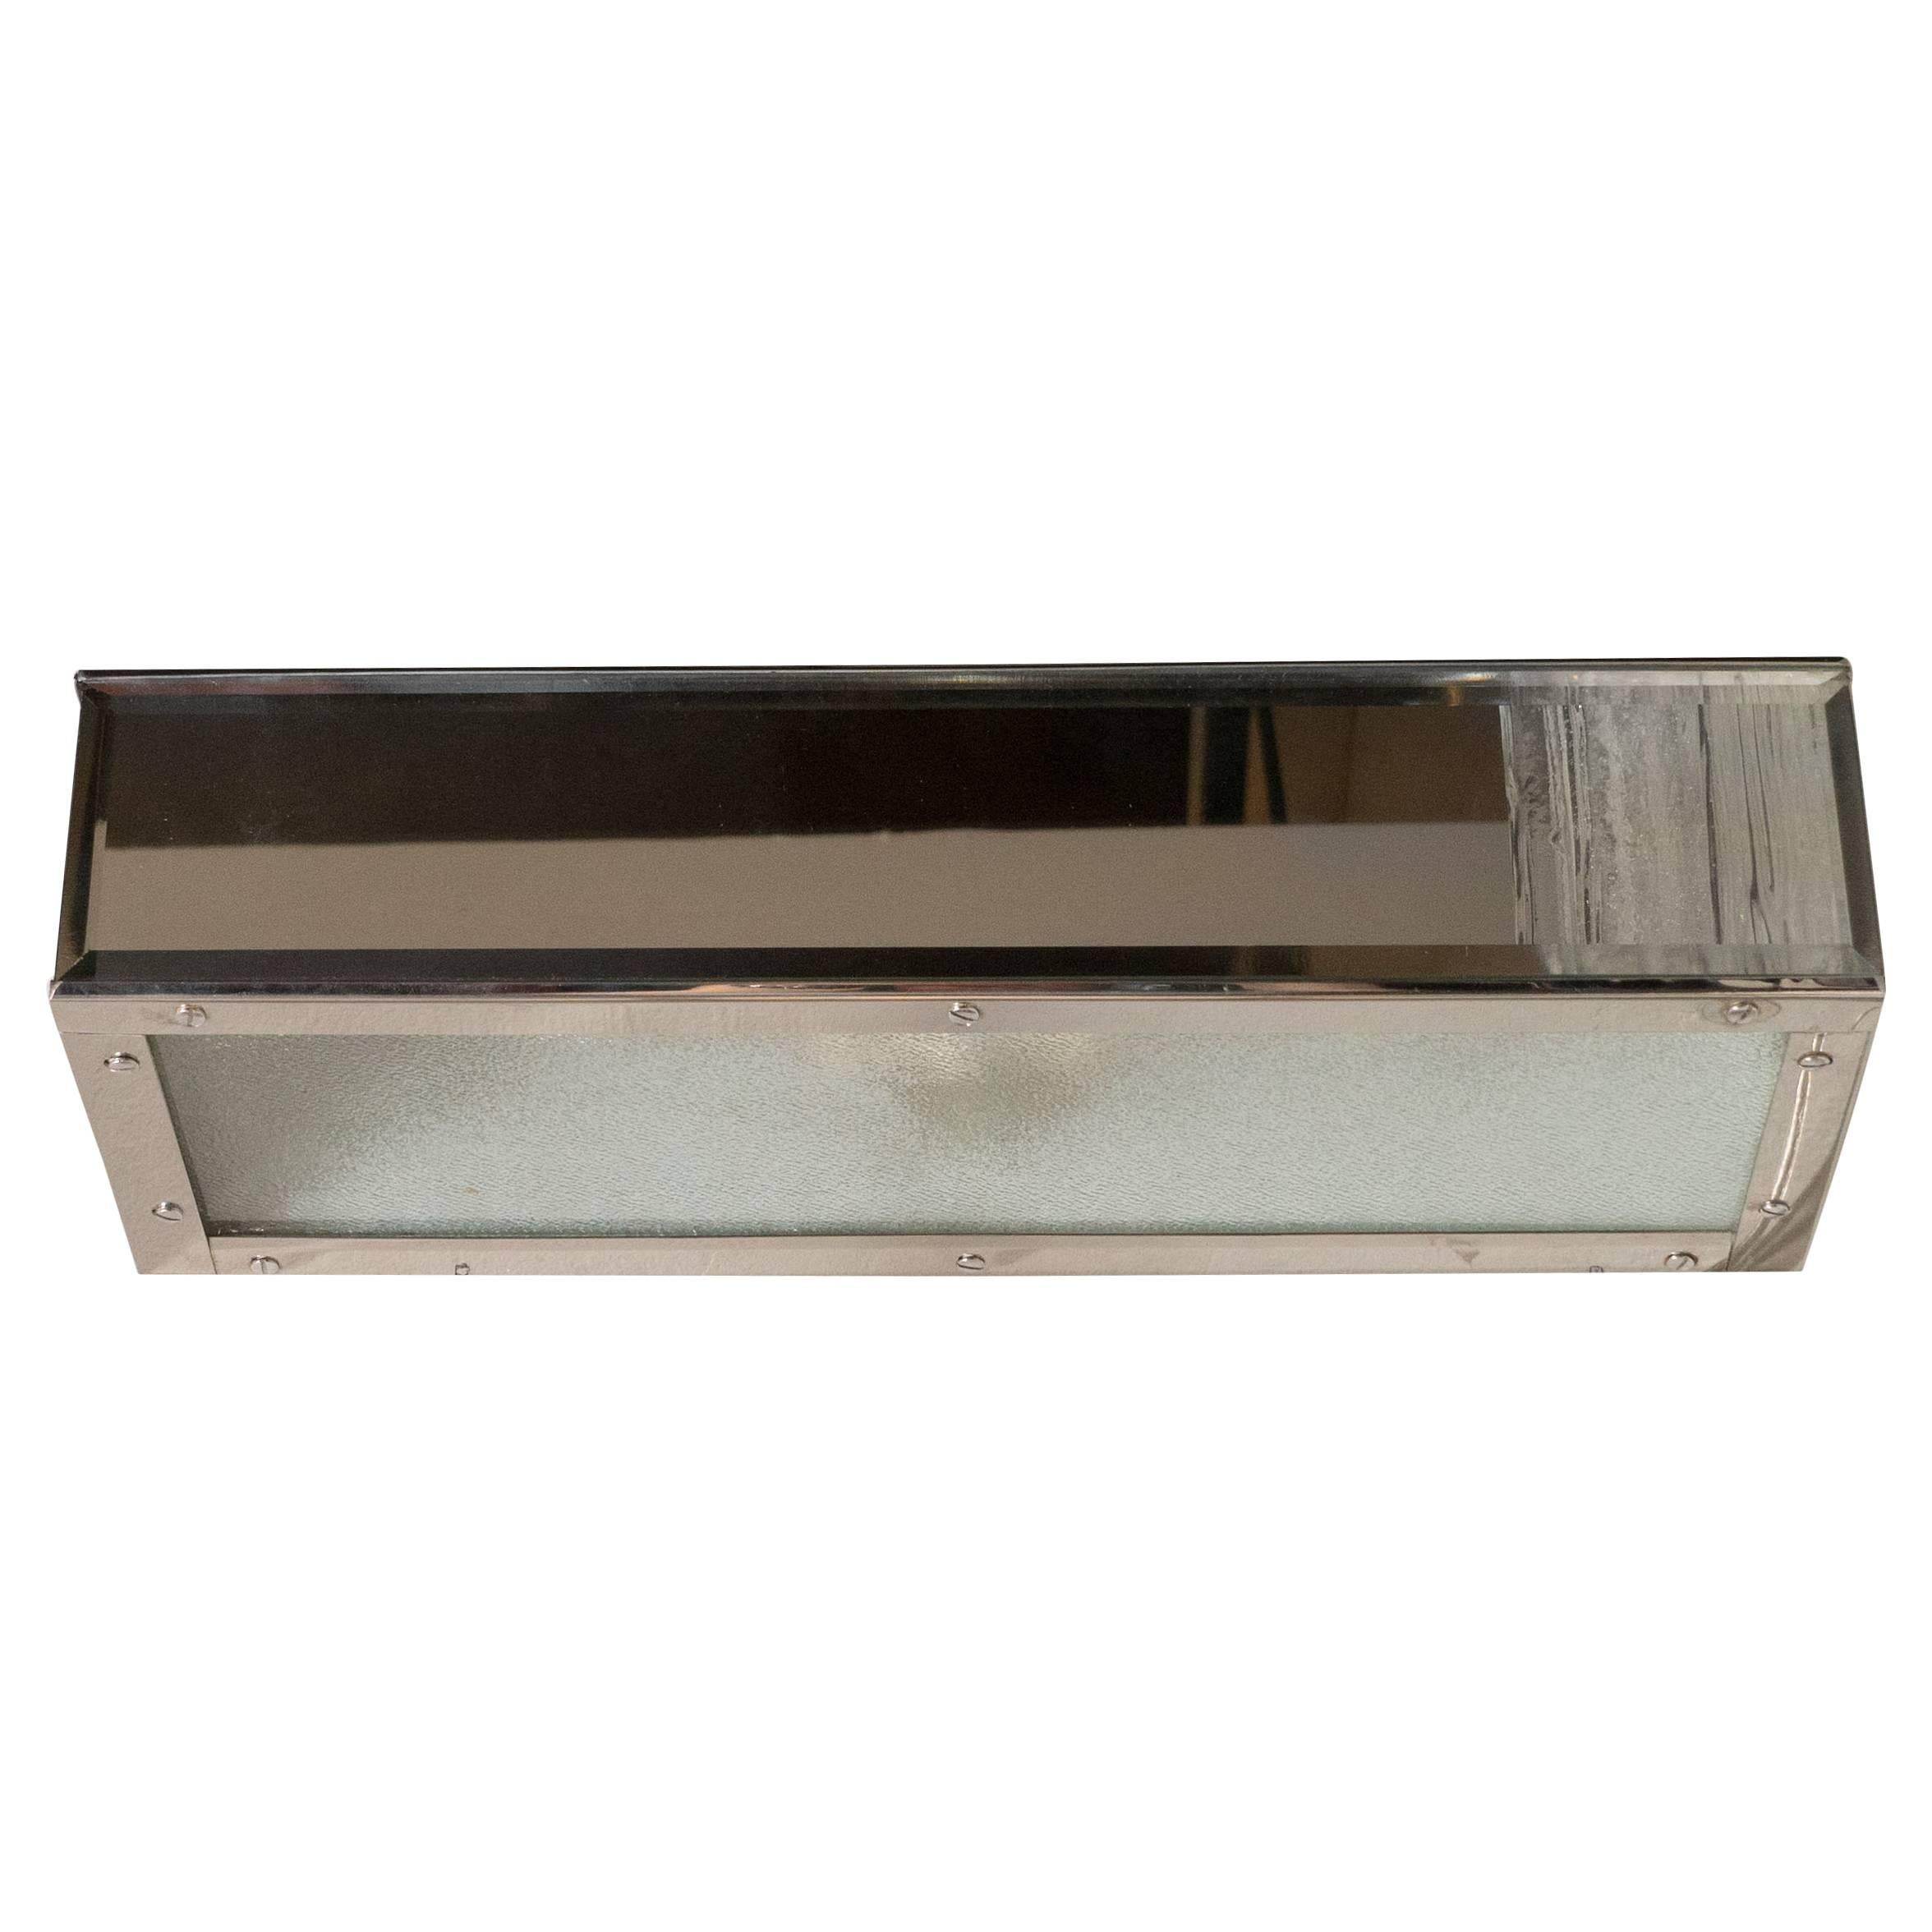 This elegant vanity light was realized in the United States, circa 1970. It features a rectangular chrome body with a bevelled mirror front. The bottom of the fixture is composed of textured glass with a subtle dappled texture. With its austere form